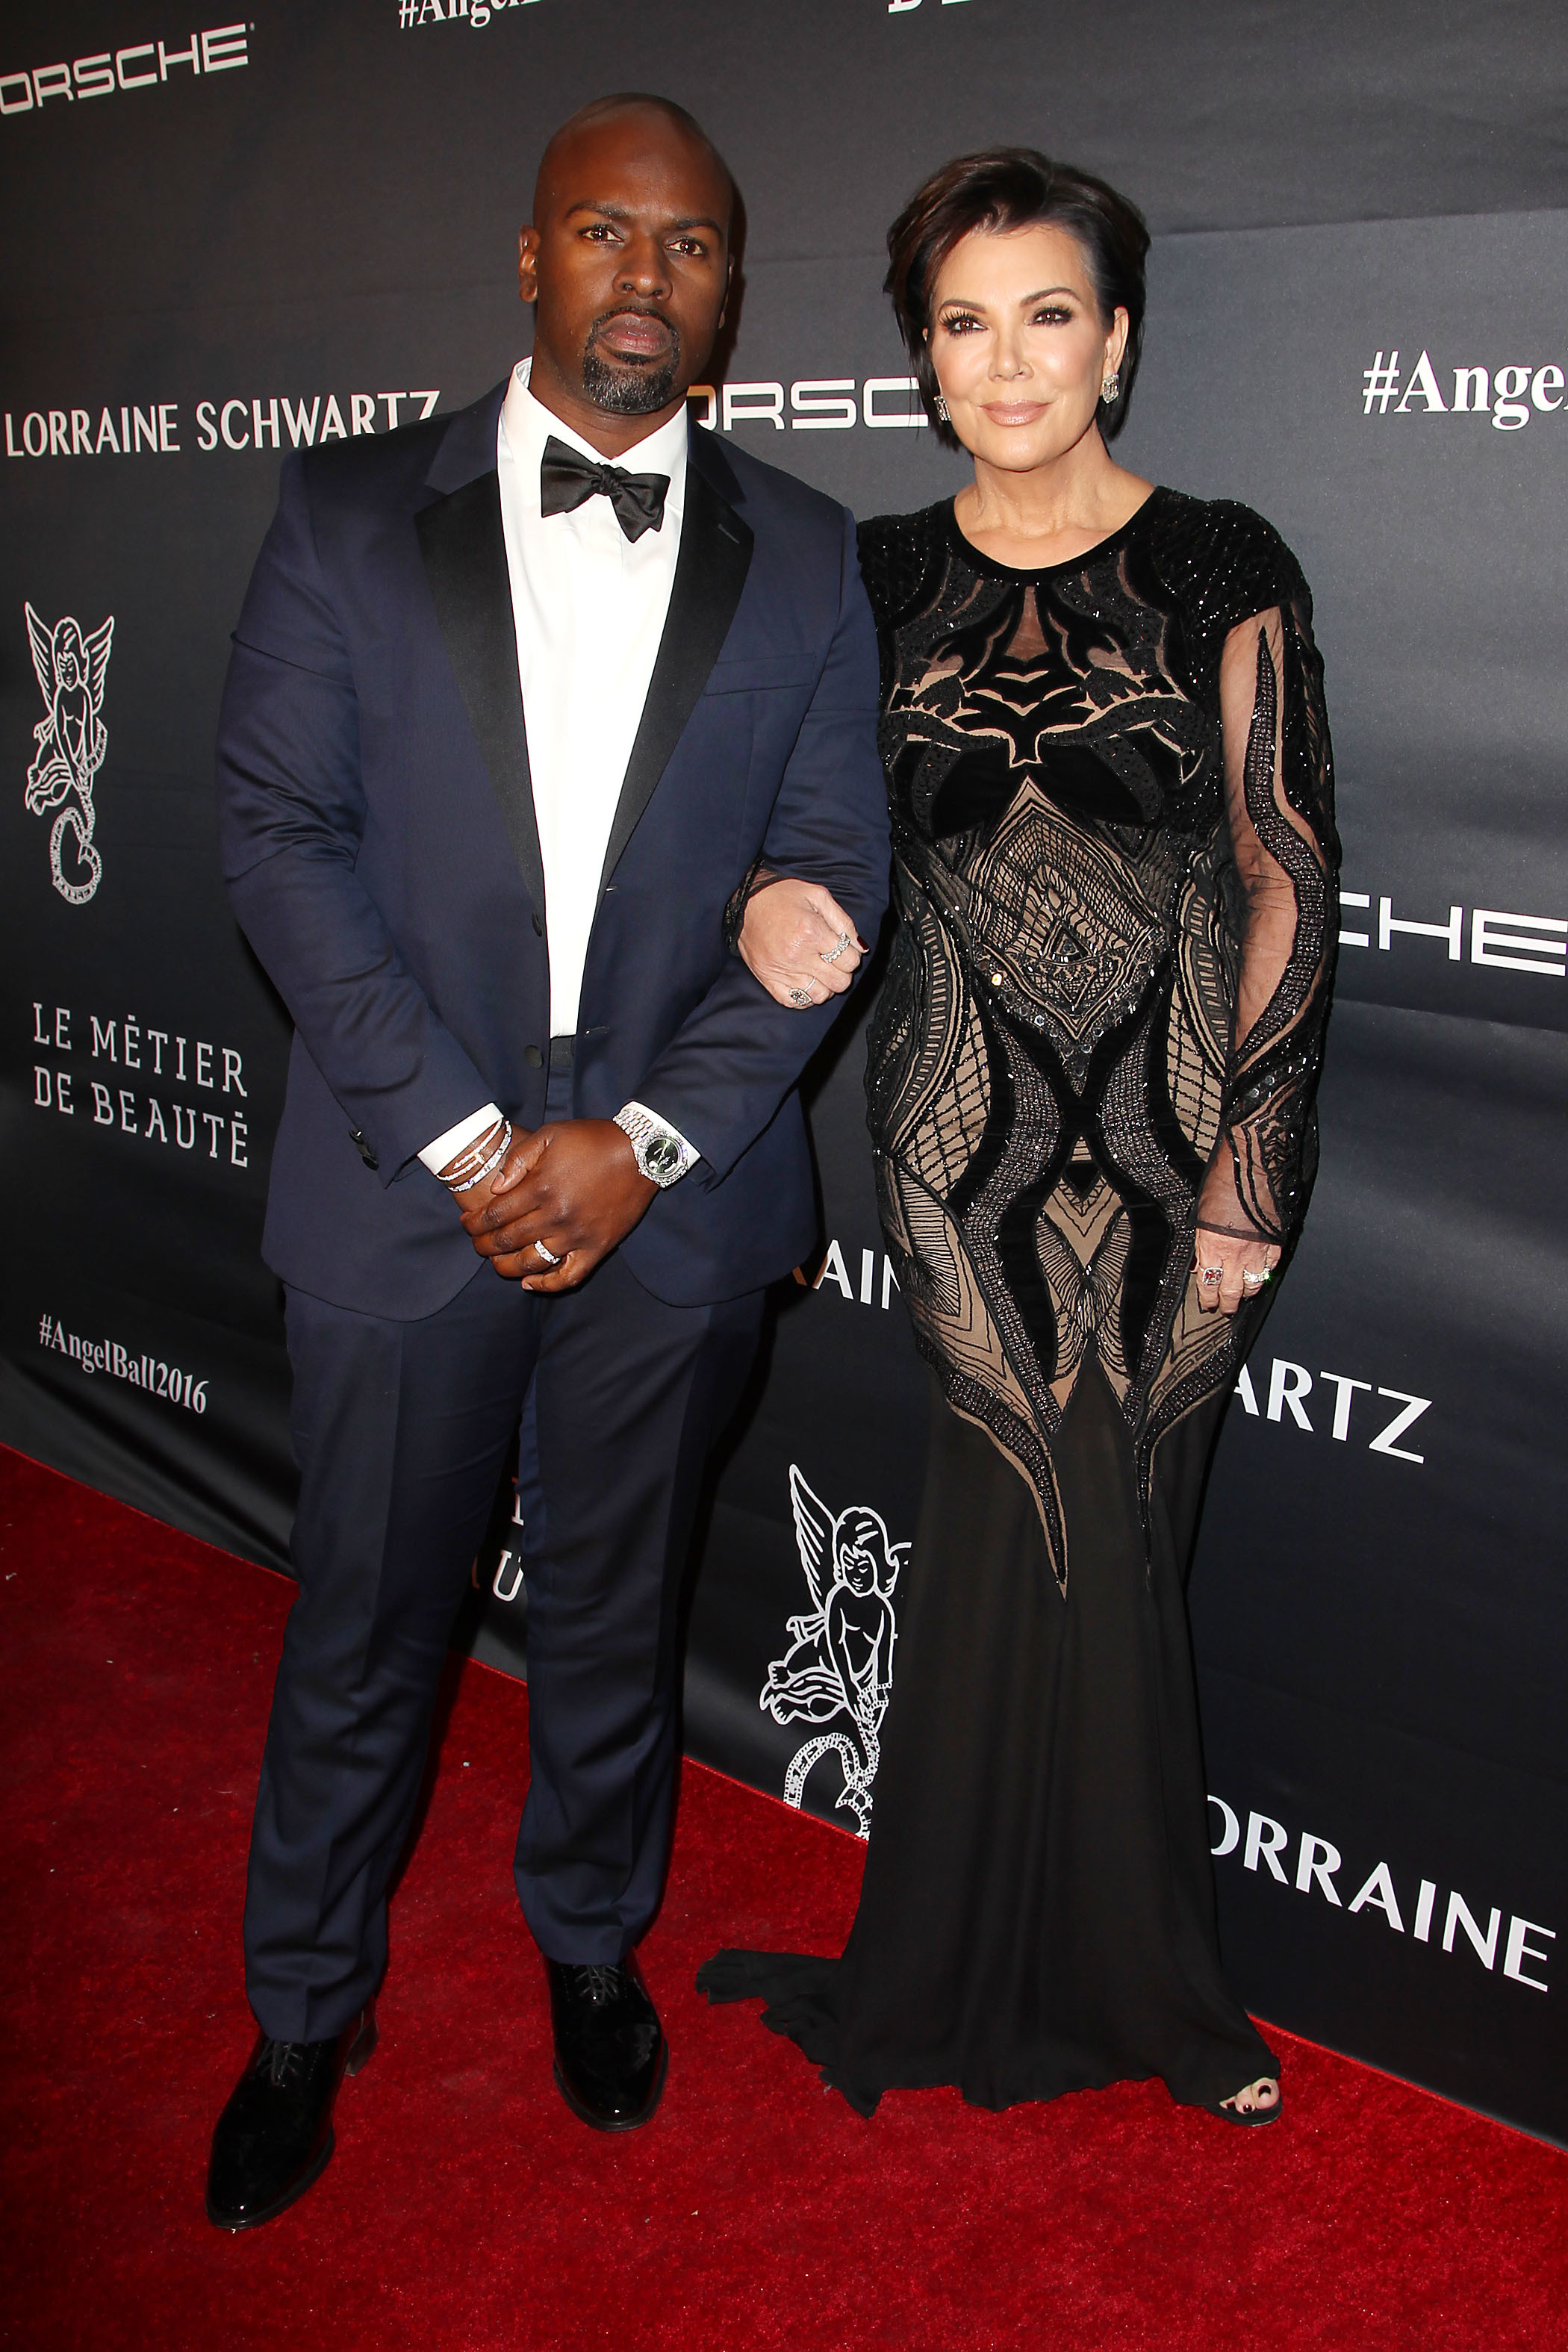 <p>Twenty-five years is nothing! That's the span of the age gap between Kardashian family matriarch <a href="https://www.wonderwall.com/celebrity/profiles/overview/kris-jenner-1409.article">Kris Jenner</a> and boyfriend Corey Gamble, who's a year younger than her eldest daughter, Kourtney Kardashian. The two have been an item since November 2014.</p>